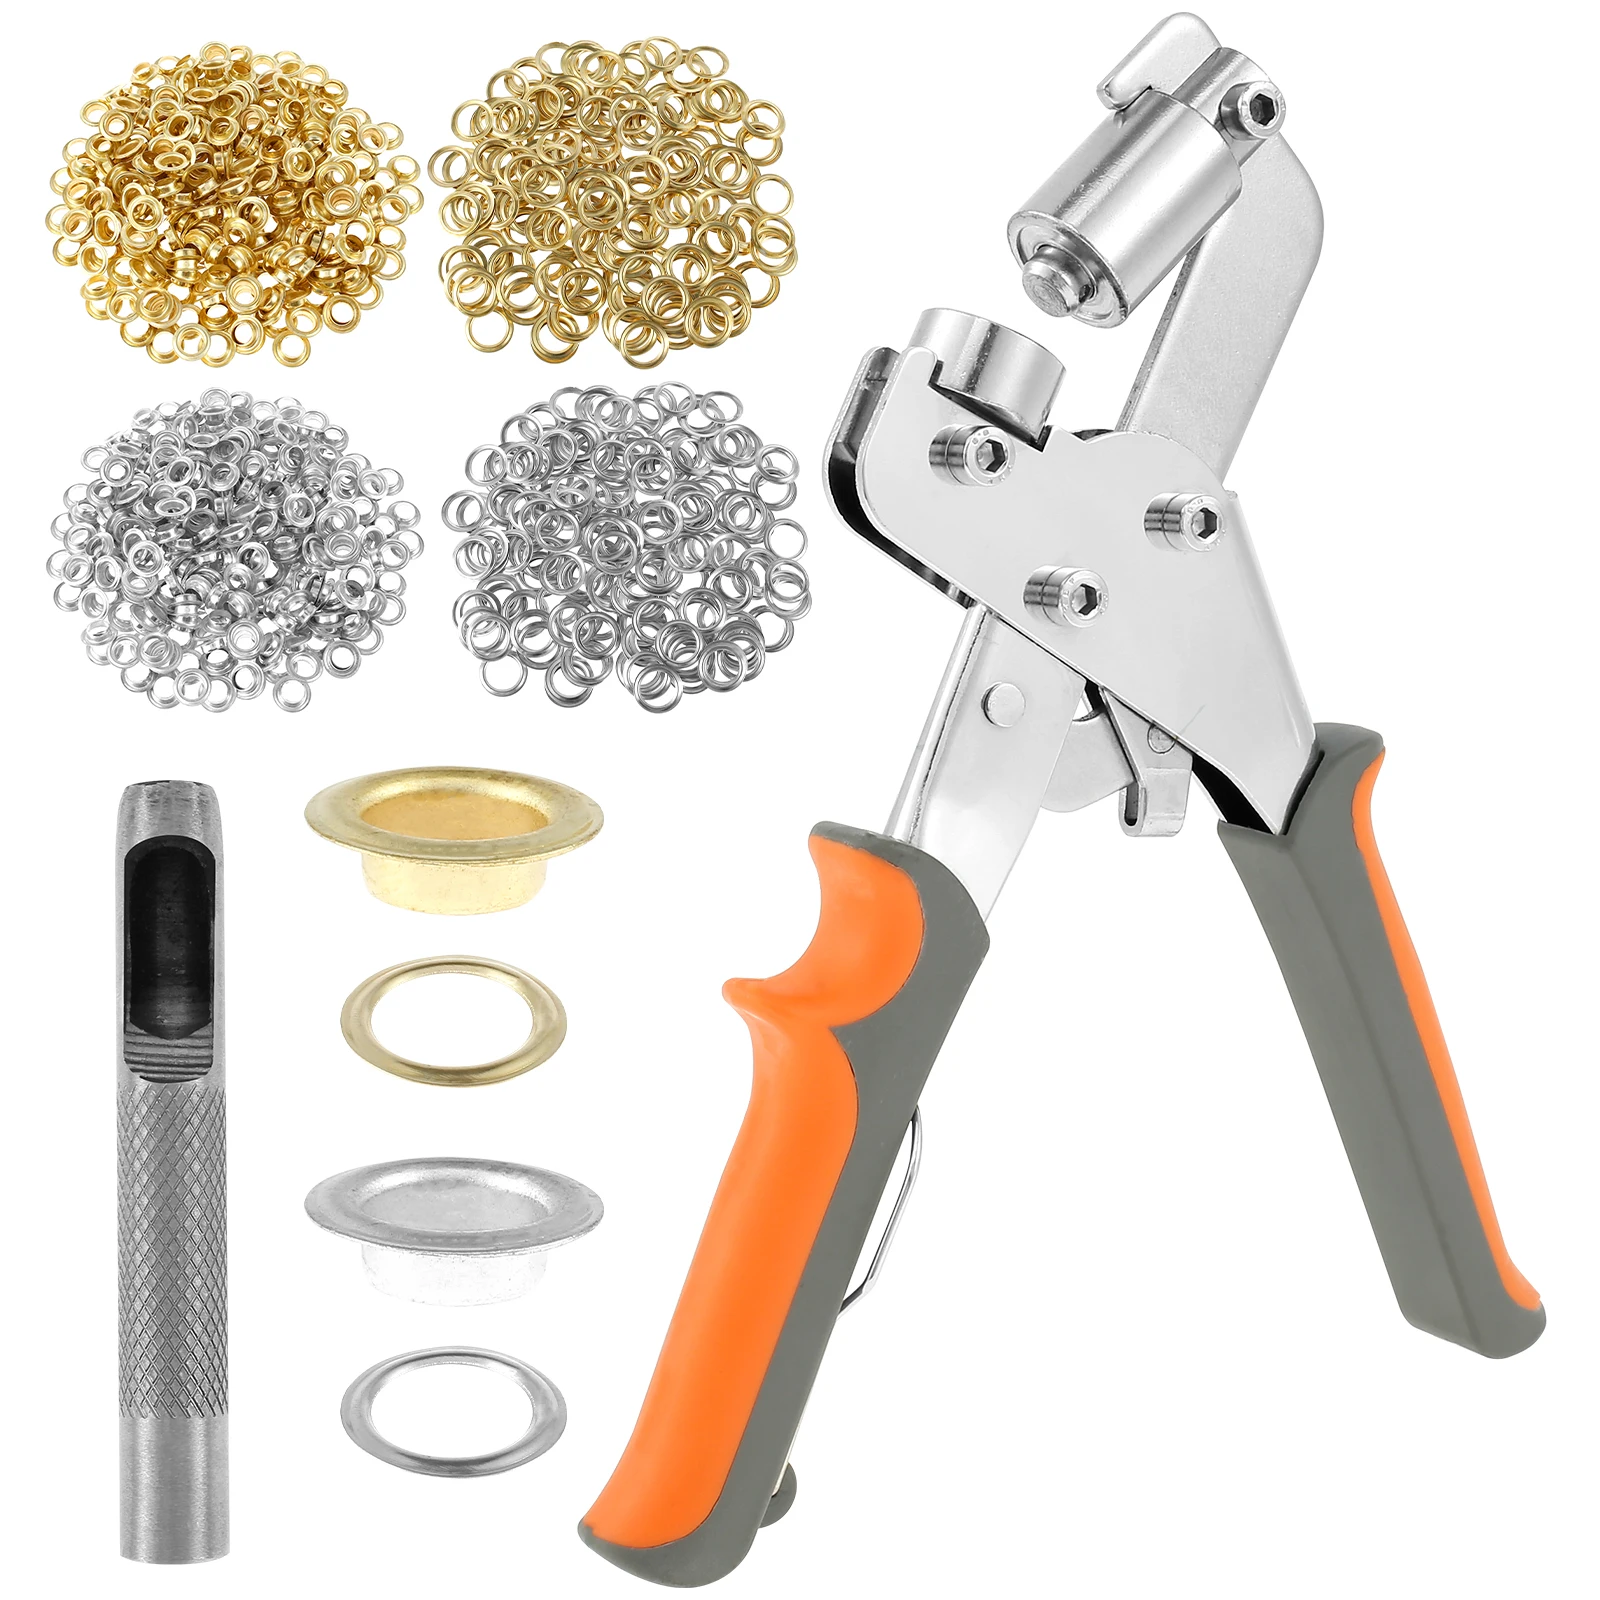 Grommet Tool Kit Handheld Hole Punch Pliers Grommet Hand Press Machine Manual Puncher with 500 Sets Metal Eyelets Grommets Kit 4 sets balance suspension ball blowing machine parent child children’s toys wood